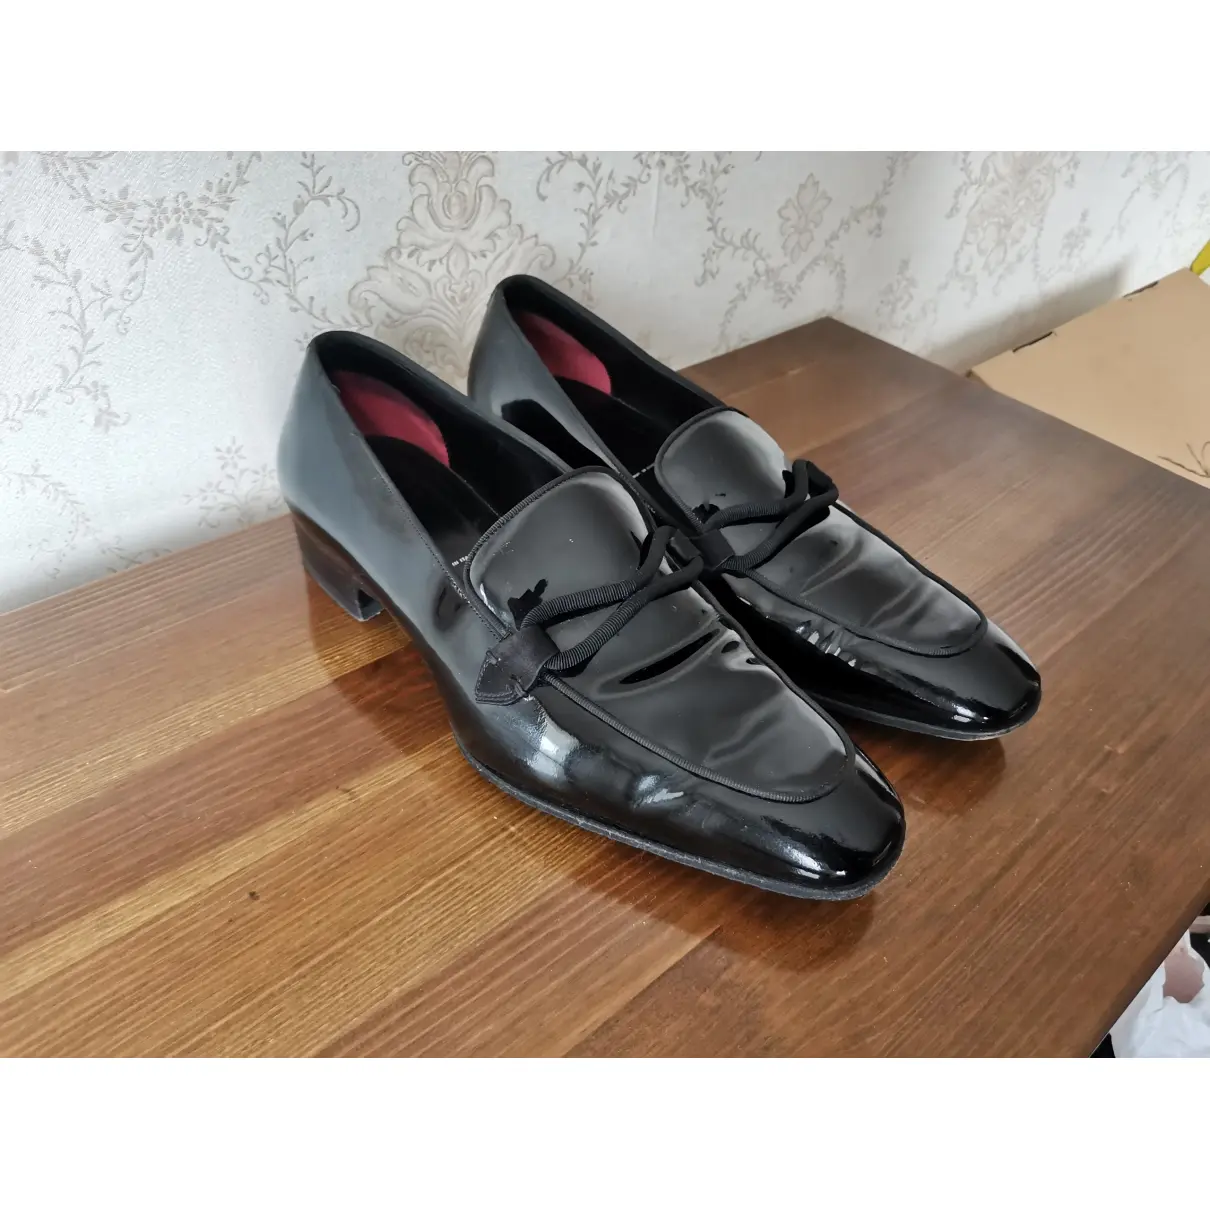 Patent leather flats Tom Ford